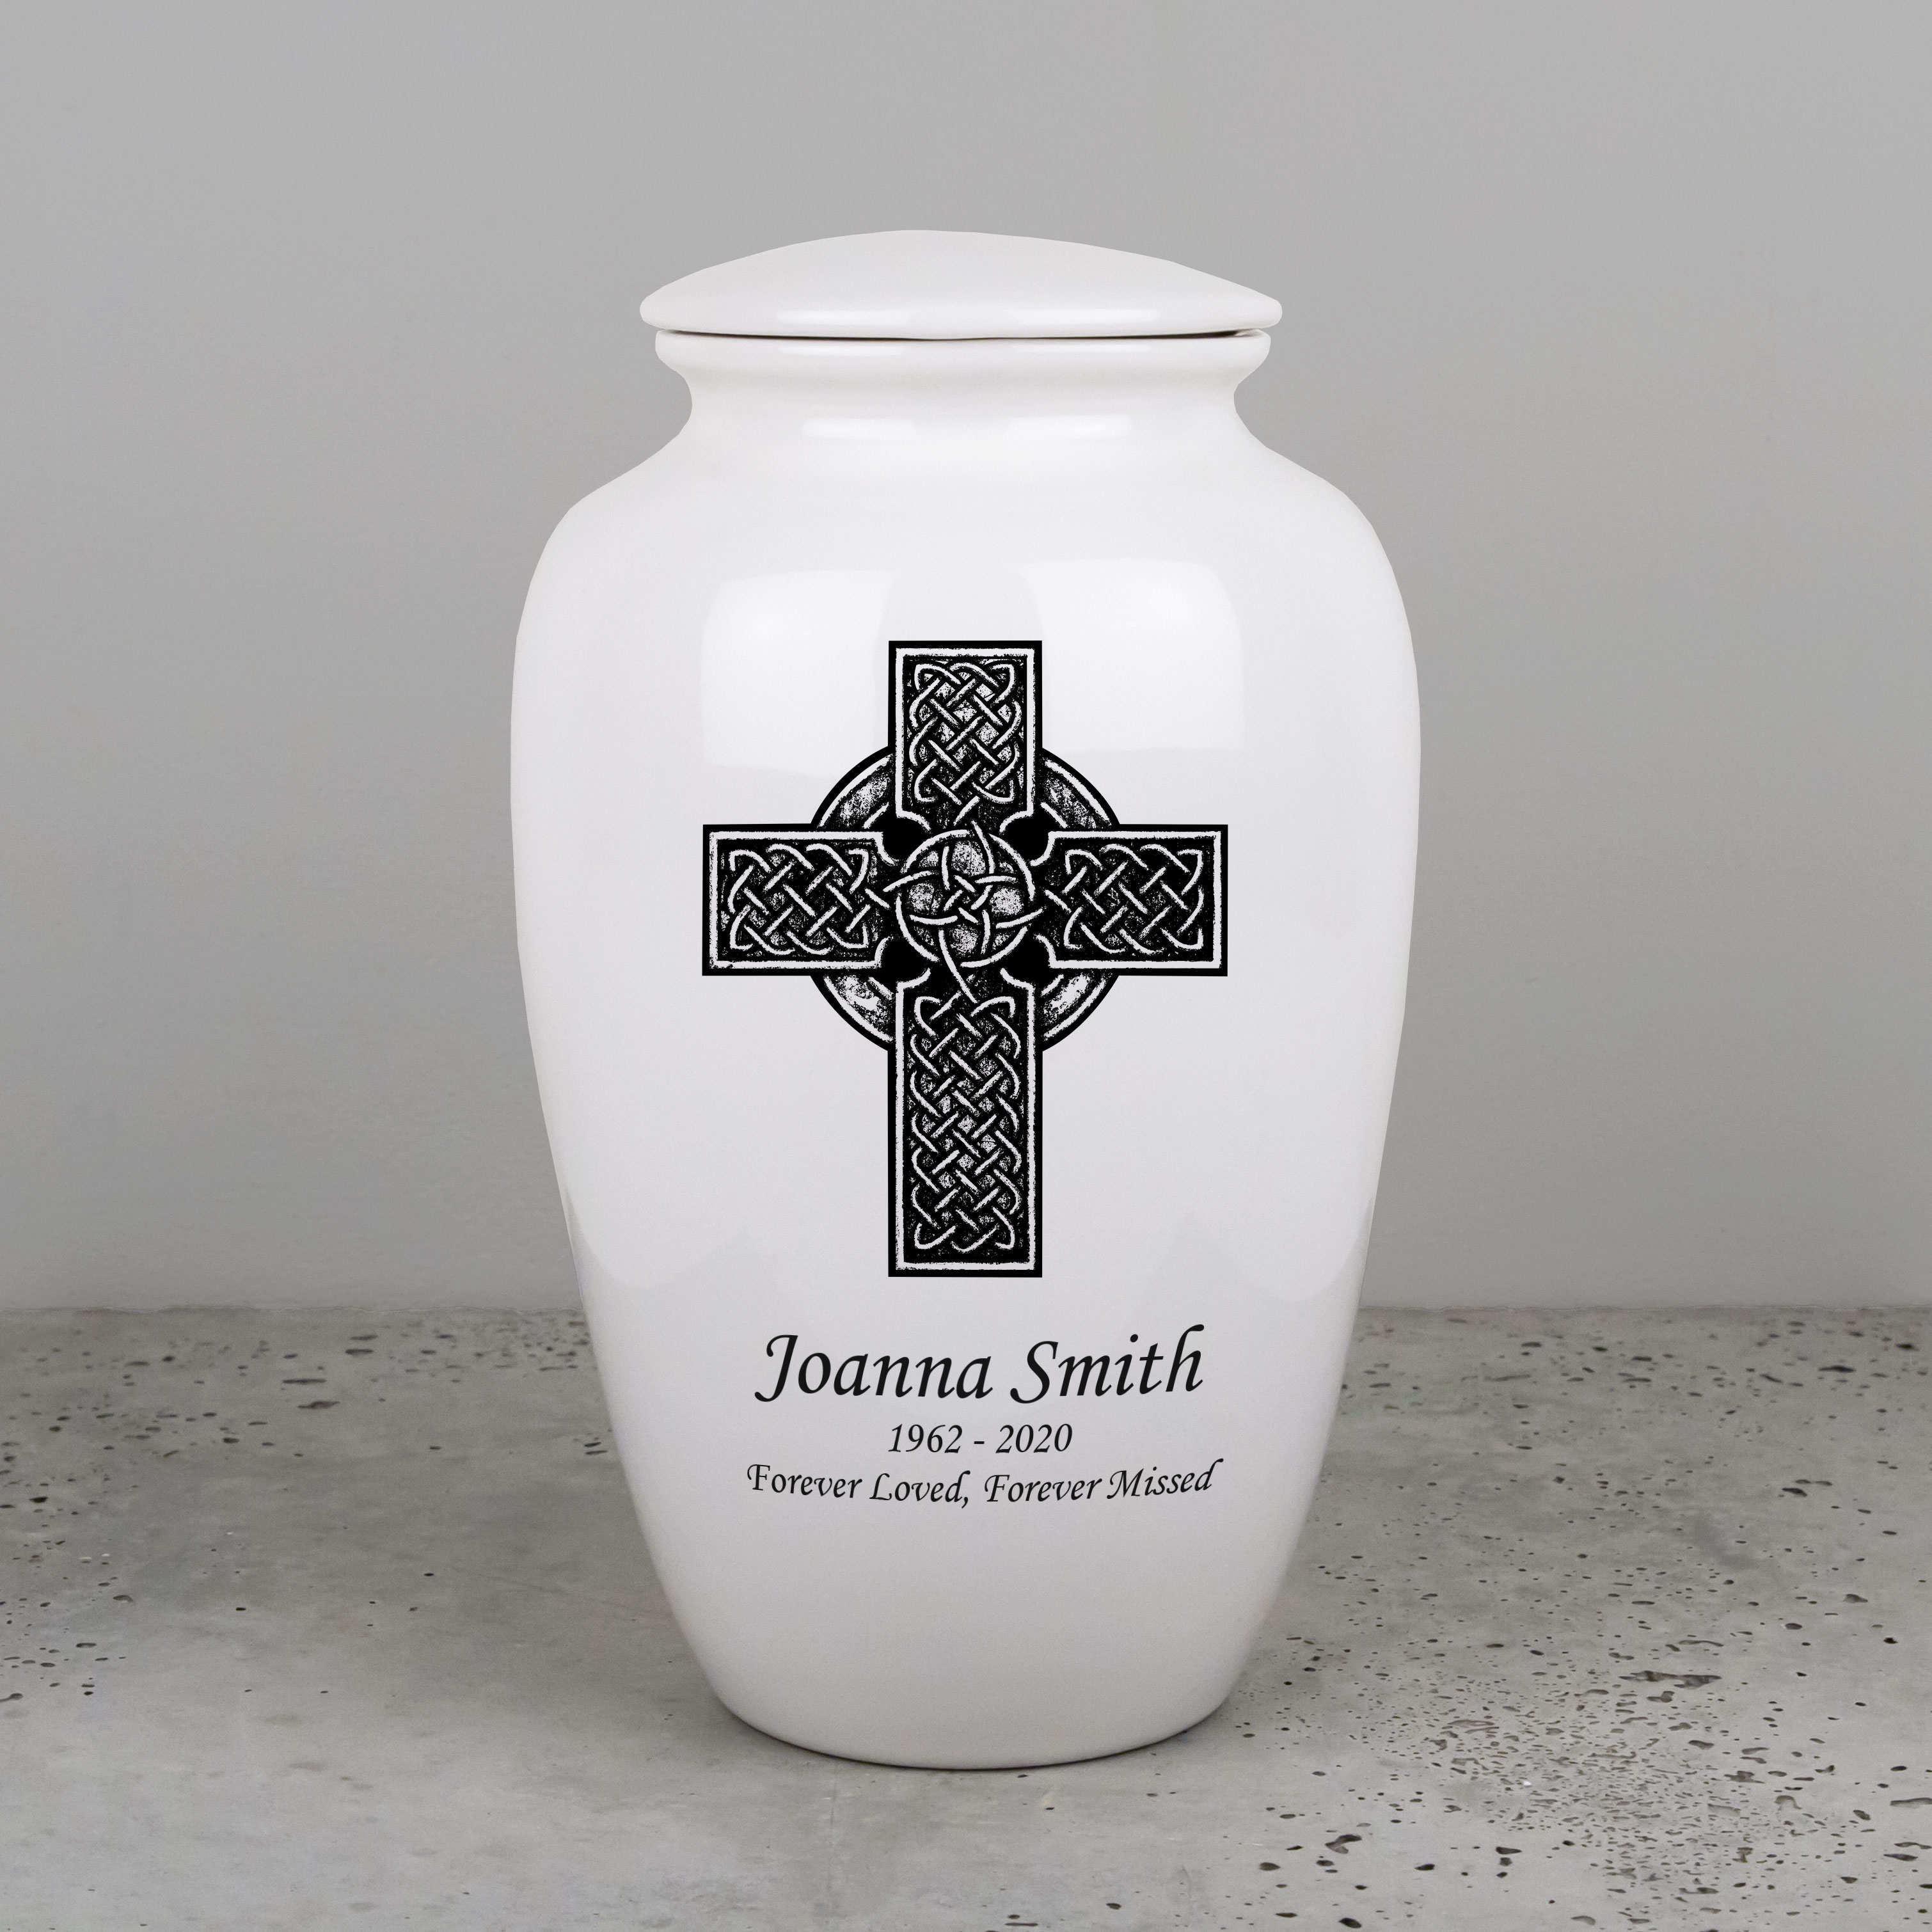 Funeral Urns - Keep Loved Ones Close - Perfect Memorials